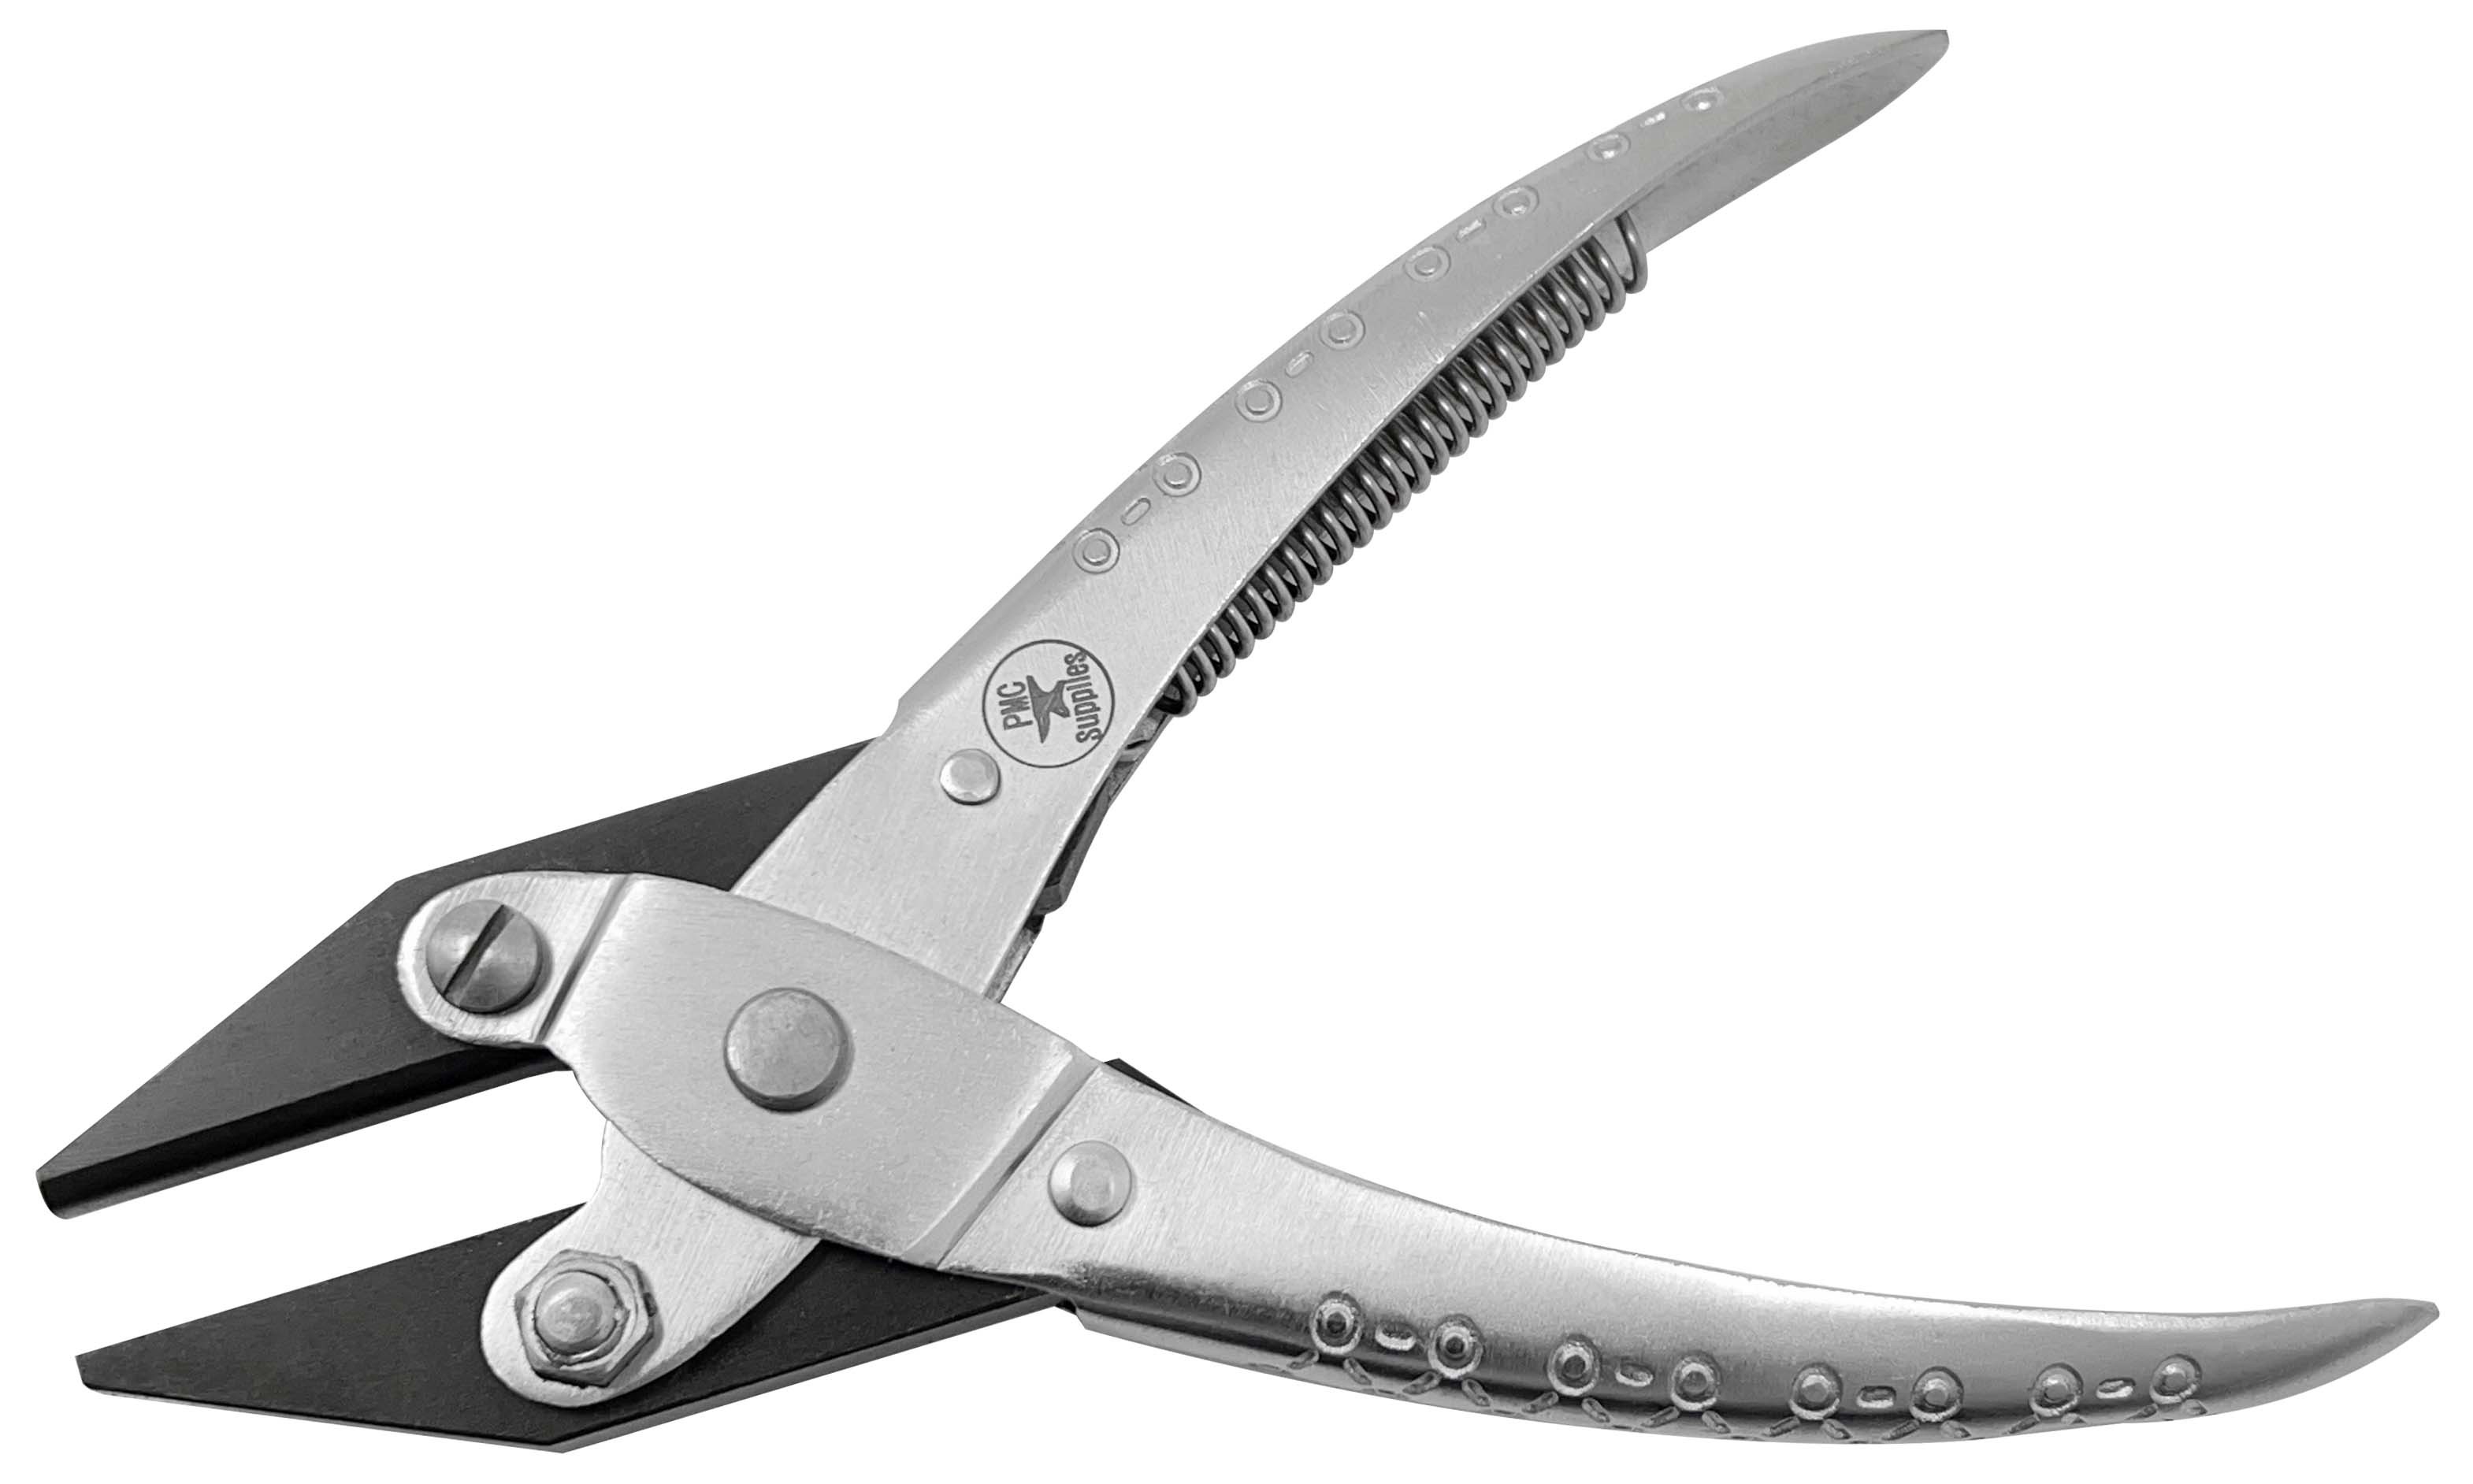 5-1/2" Half Round and Flat Nose Parallel Action Pliers w/ Springs